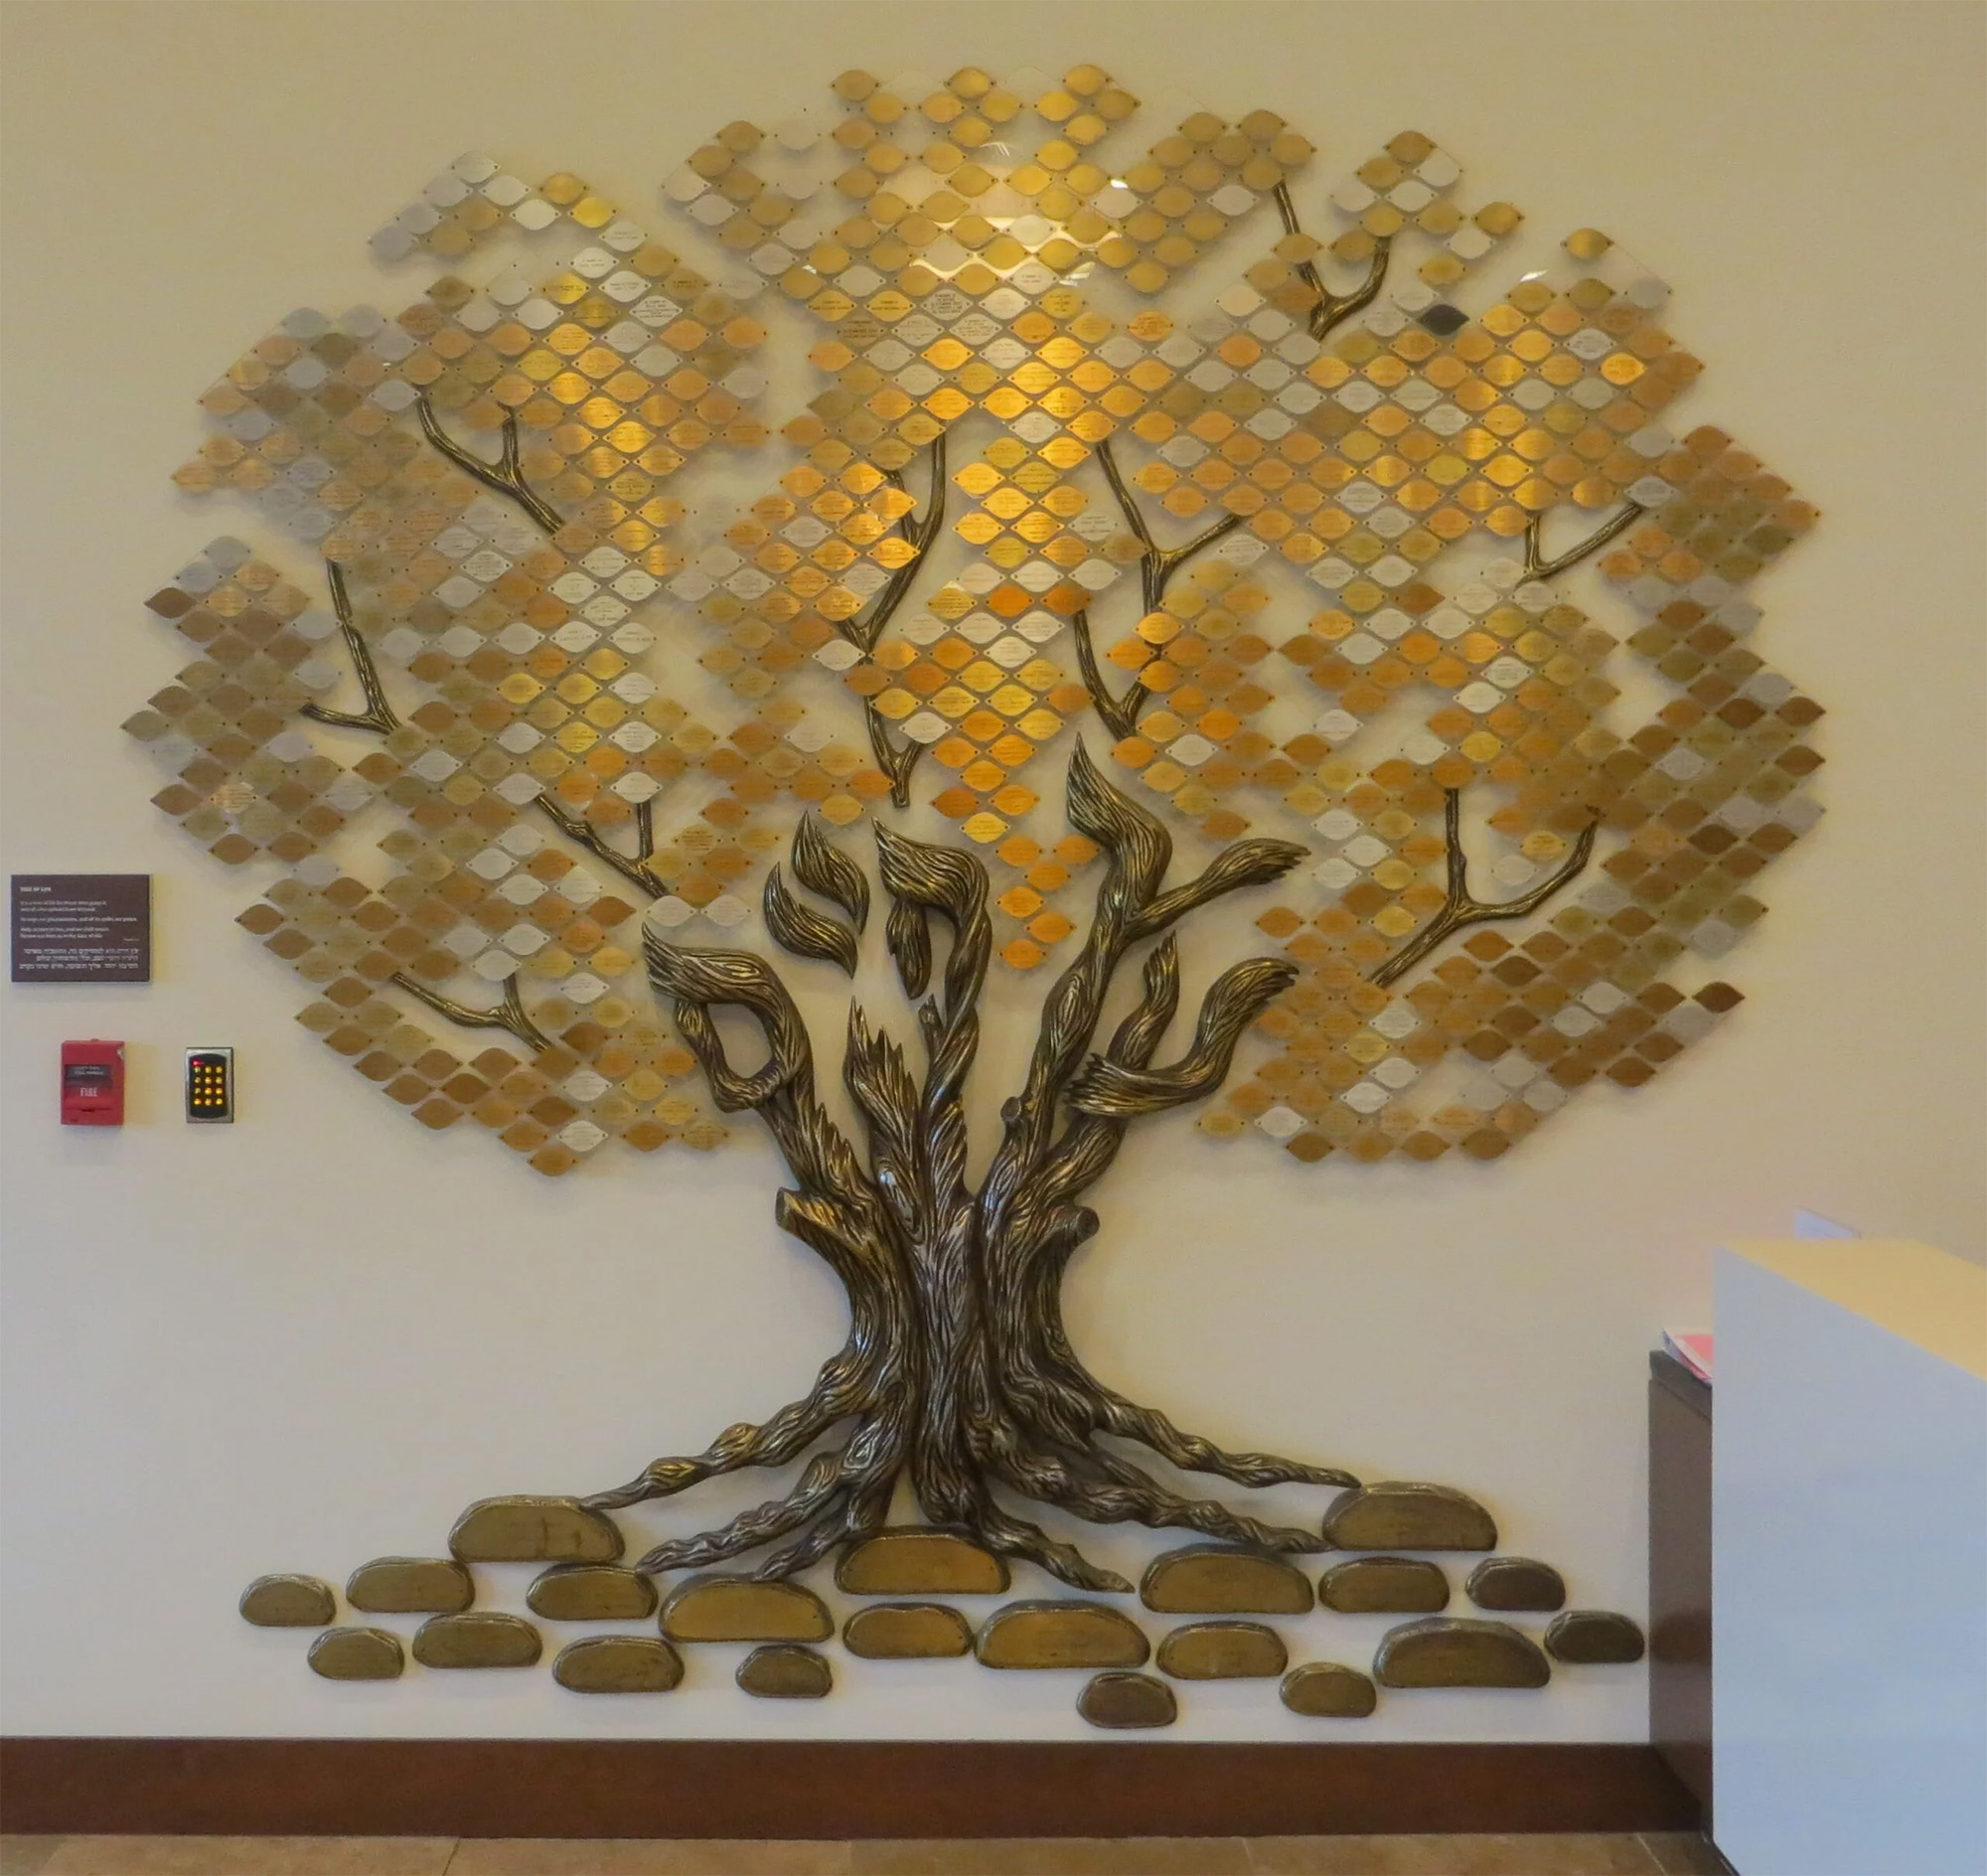 The Etz Chiam, or Tree of Life, is a mosaic of &quot;leaves&quot; engraved with the names of donors at Jewish Senior Services in Bridgeport, CT. Photo Courtesy Mozaic Senior Life